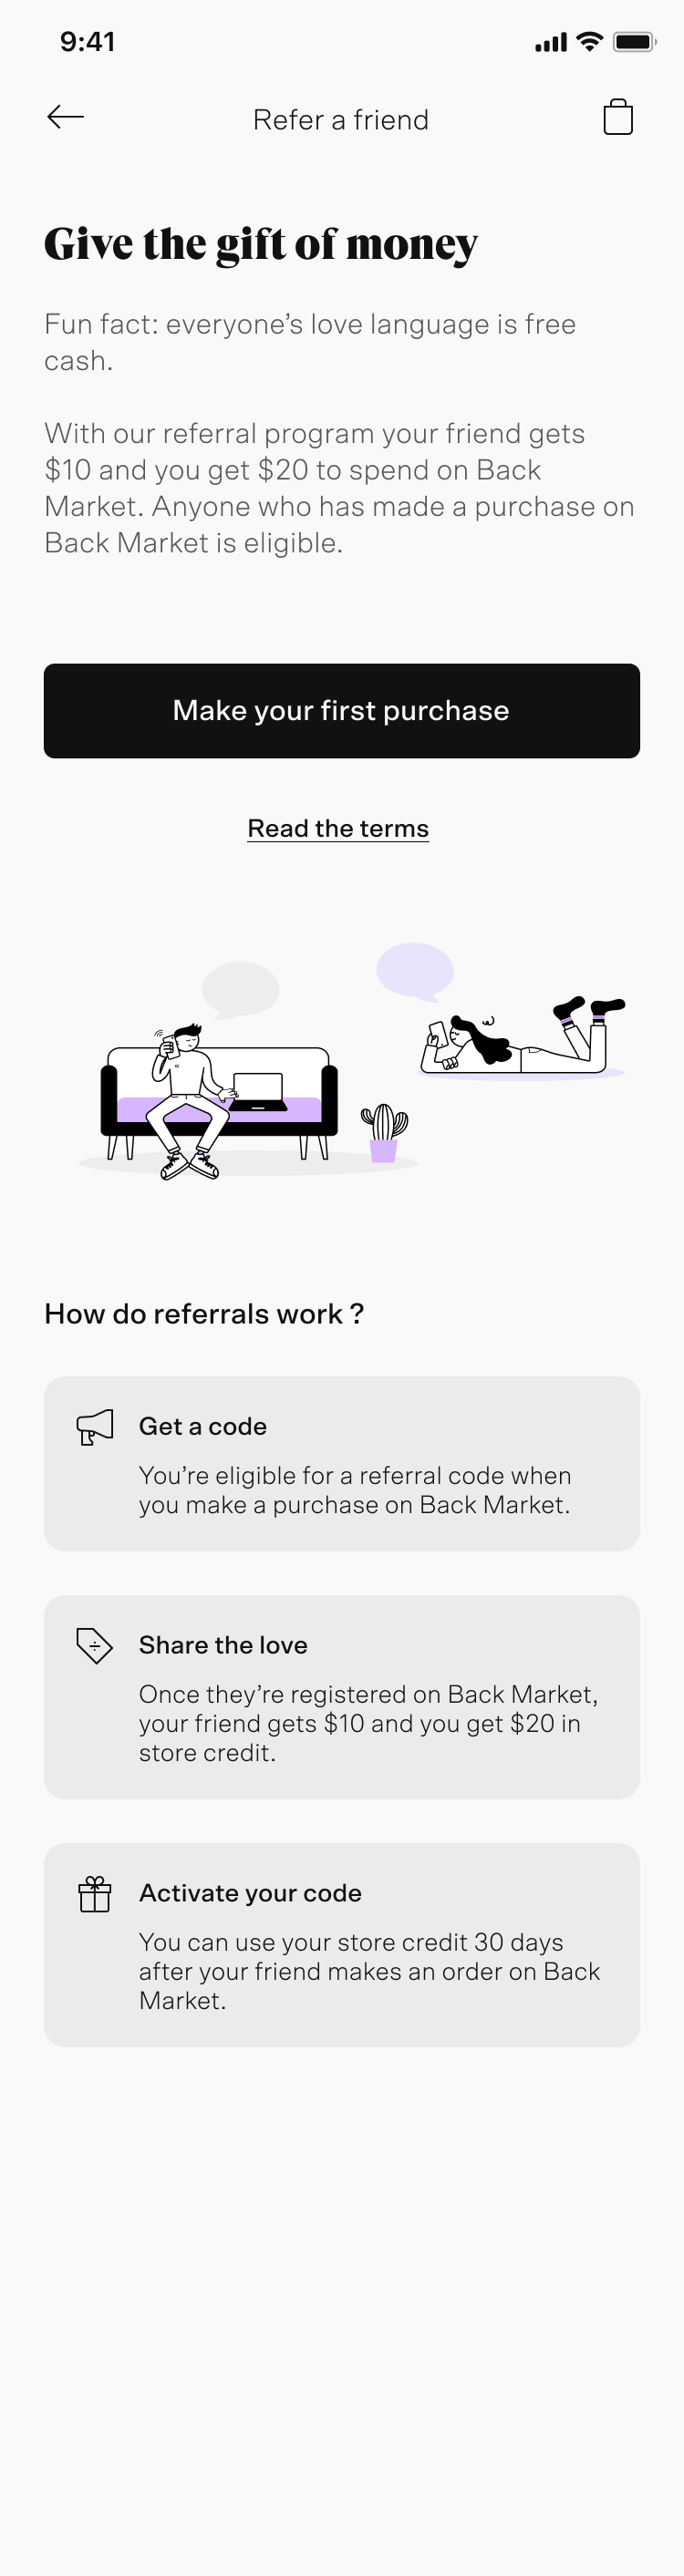 NO REFERRAL CODE.png